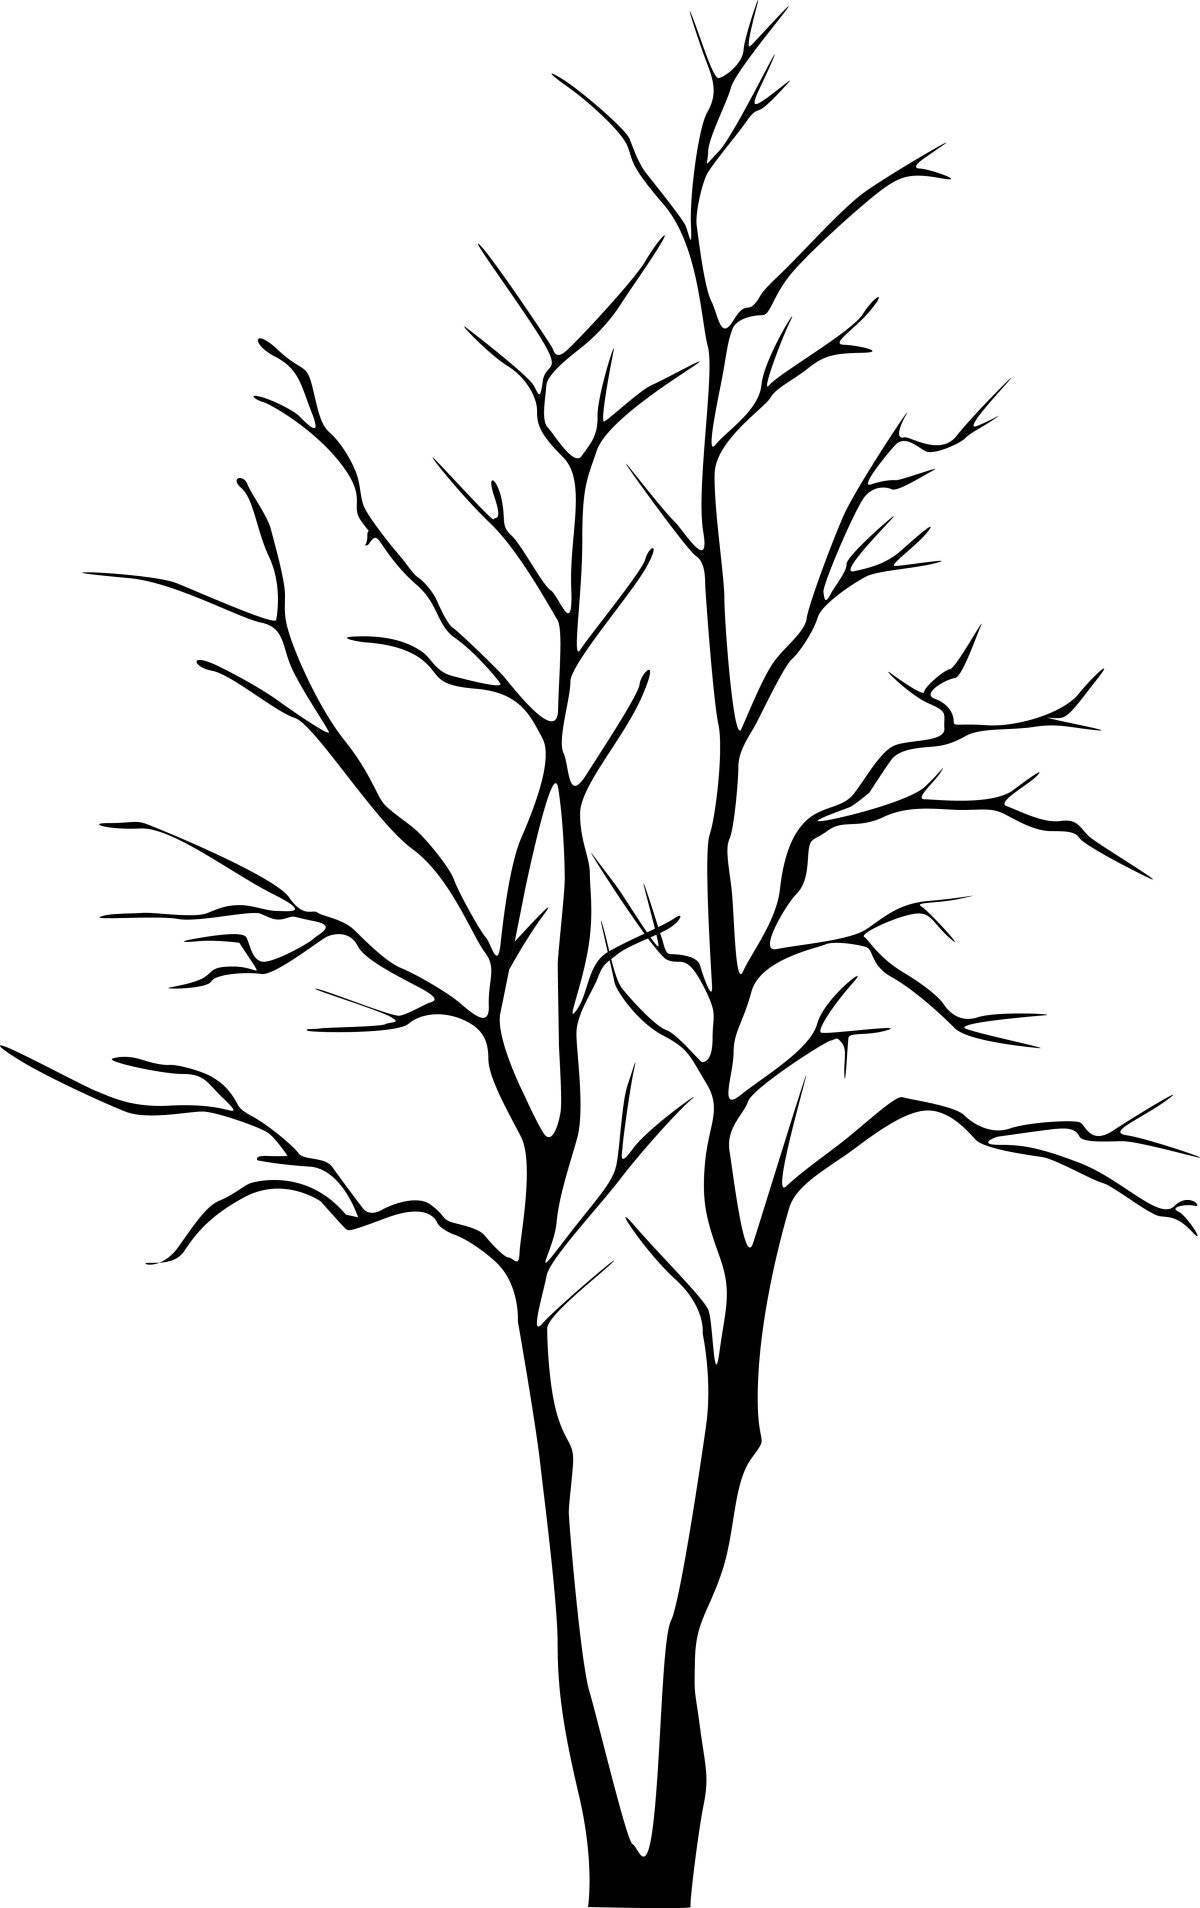 Coloring book amazing tree silhouette